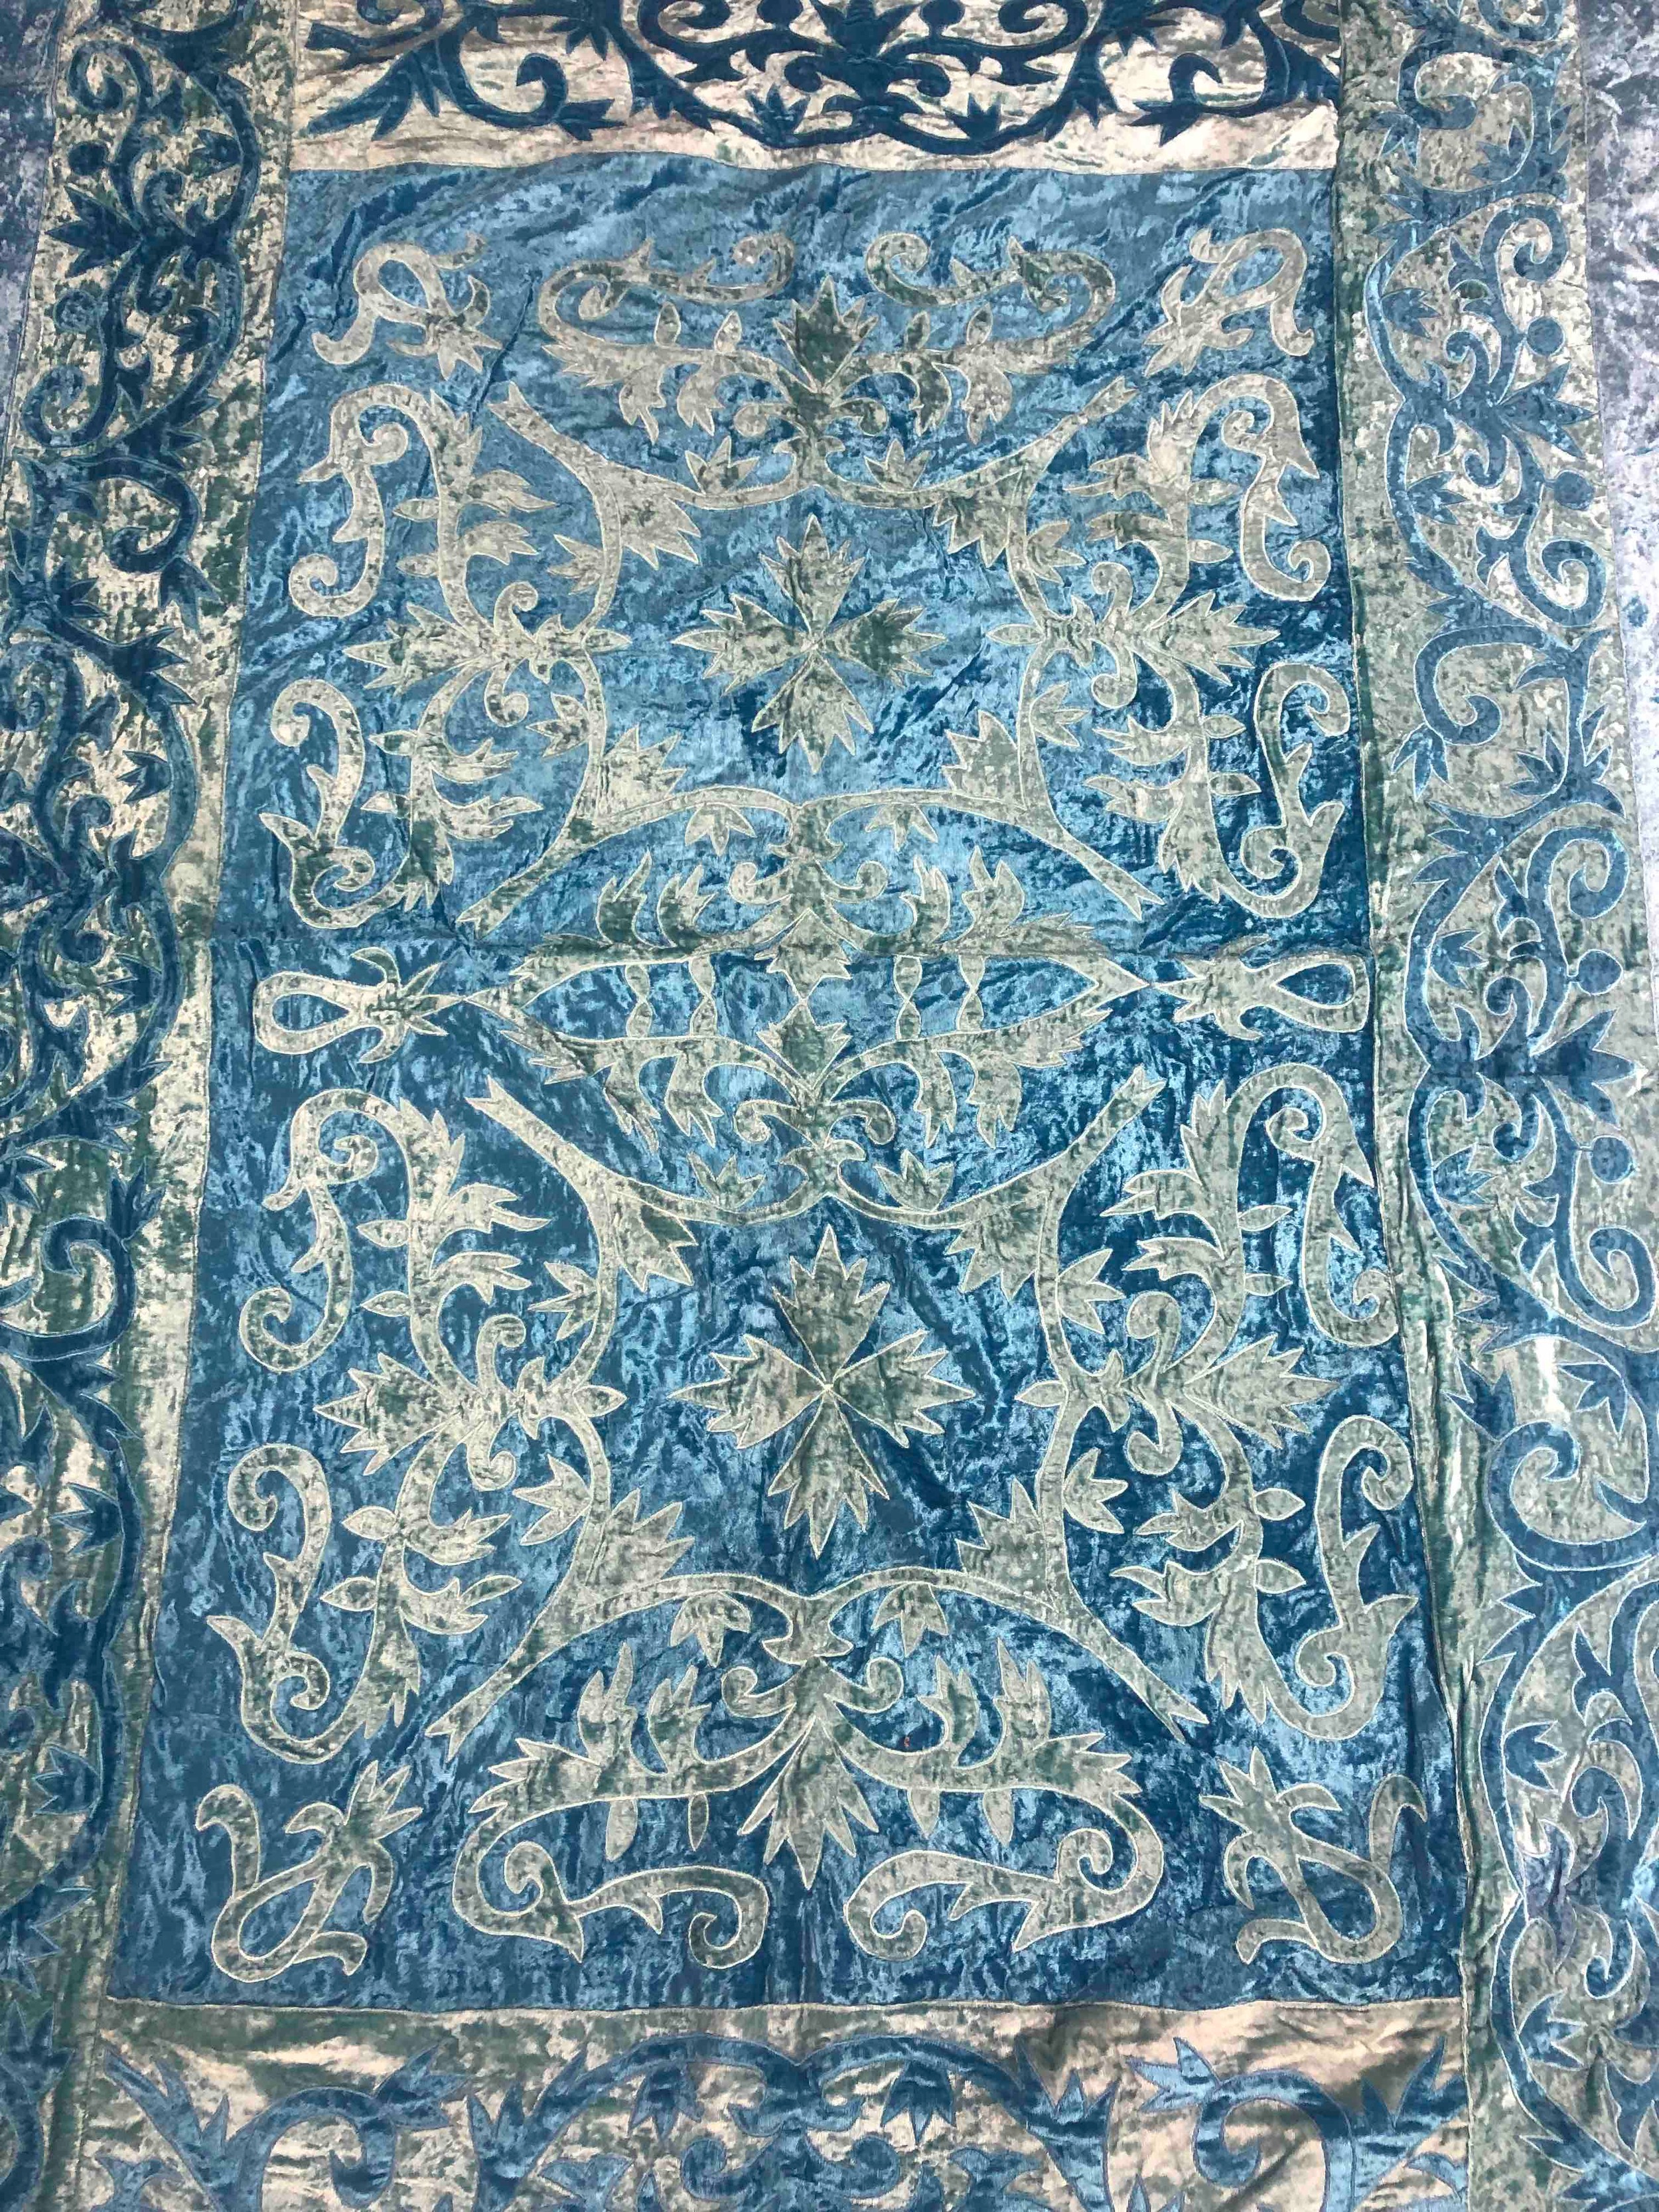 An Indian cotton bedspread embroidered in shades of blue and teal. L.265 W.210 cm. - Image 2 of 4